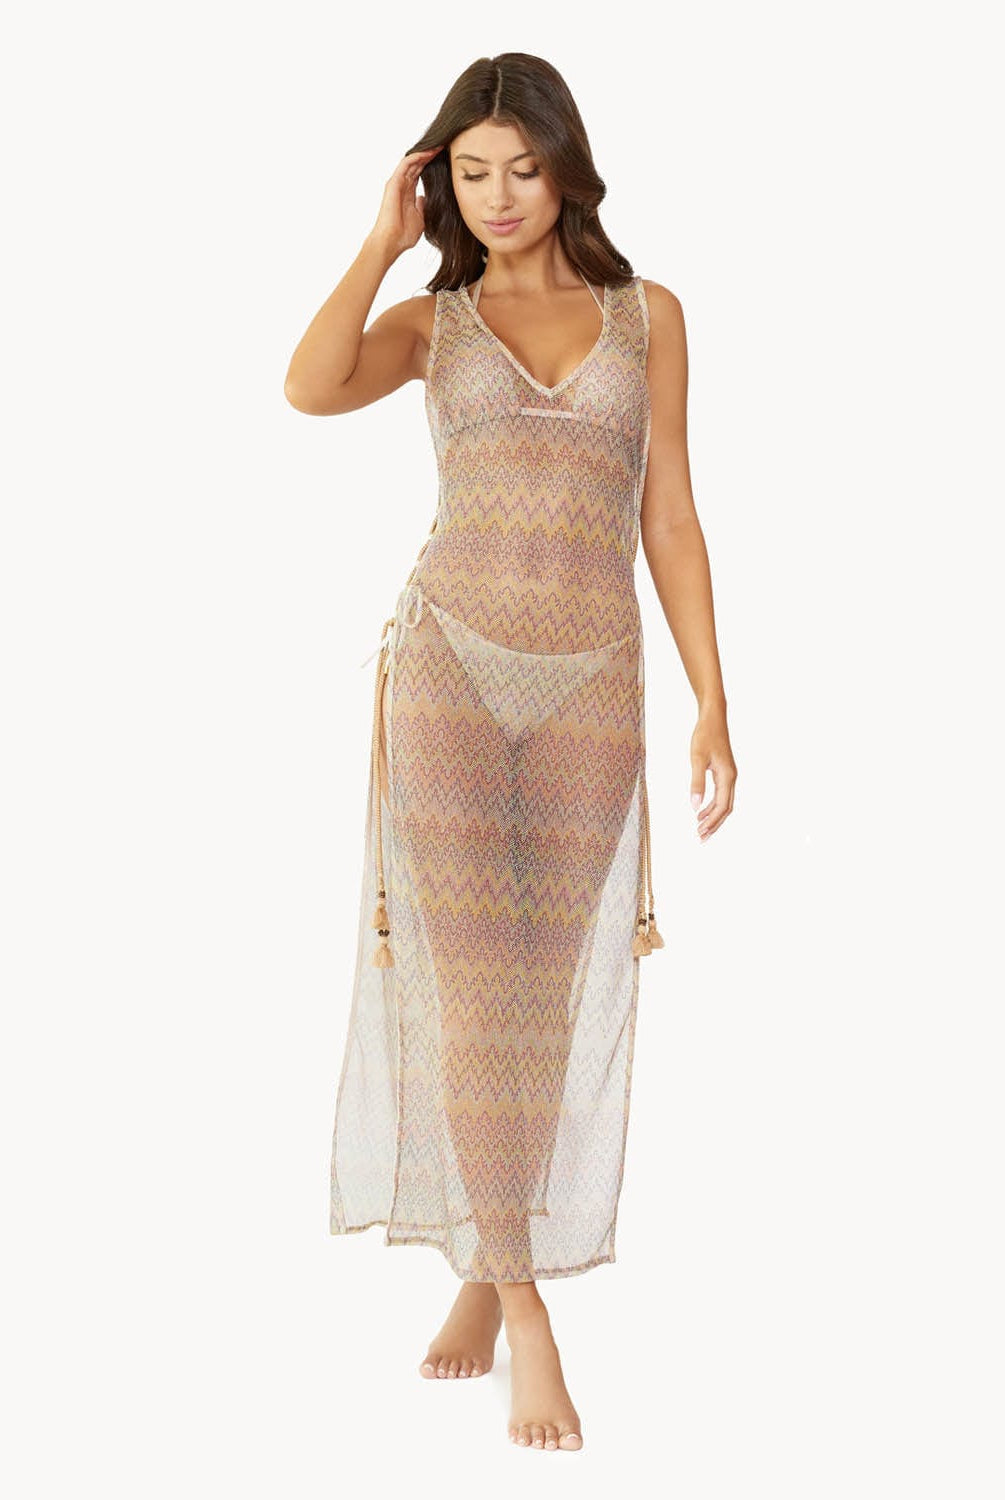 Brunette woman wearing a multi-colored sleeveless lace tunic with open side slits and lace-up side details with tassel tie ends over a matching bikini stands in front of white wall.